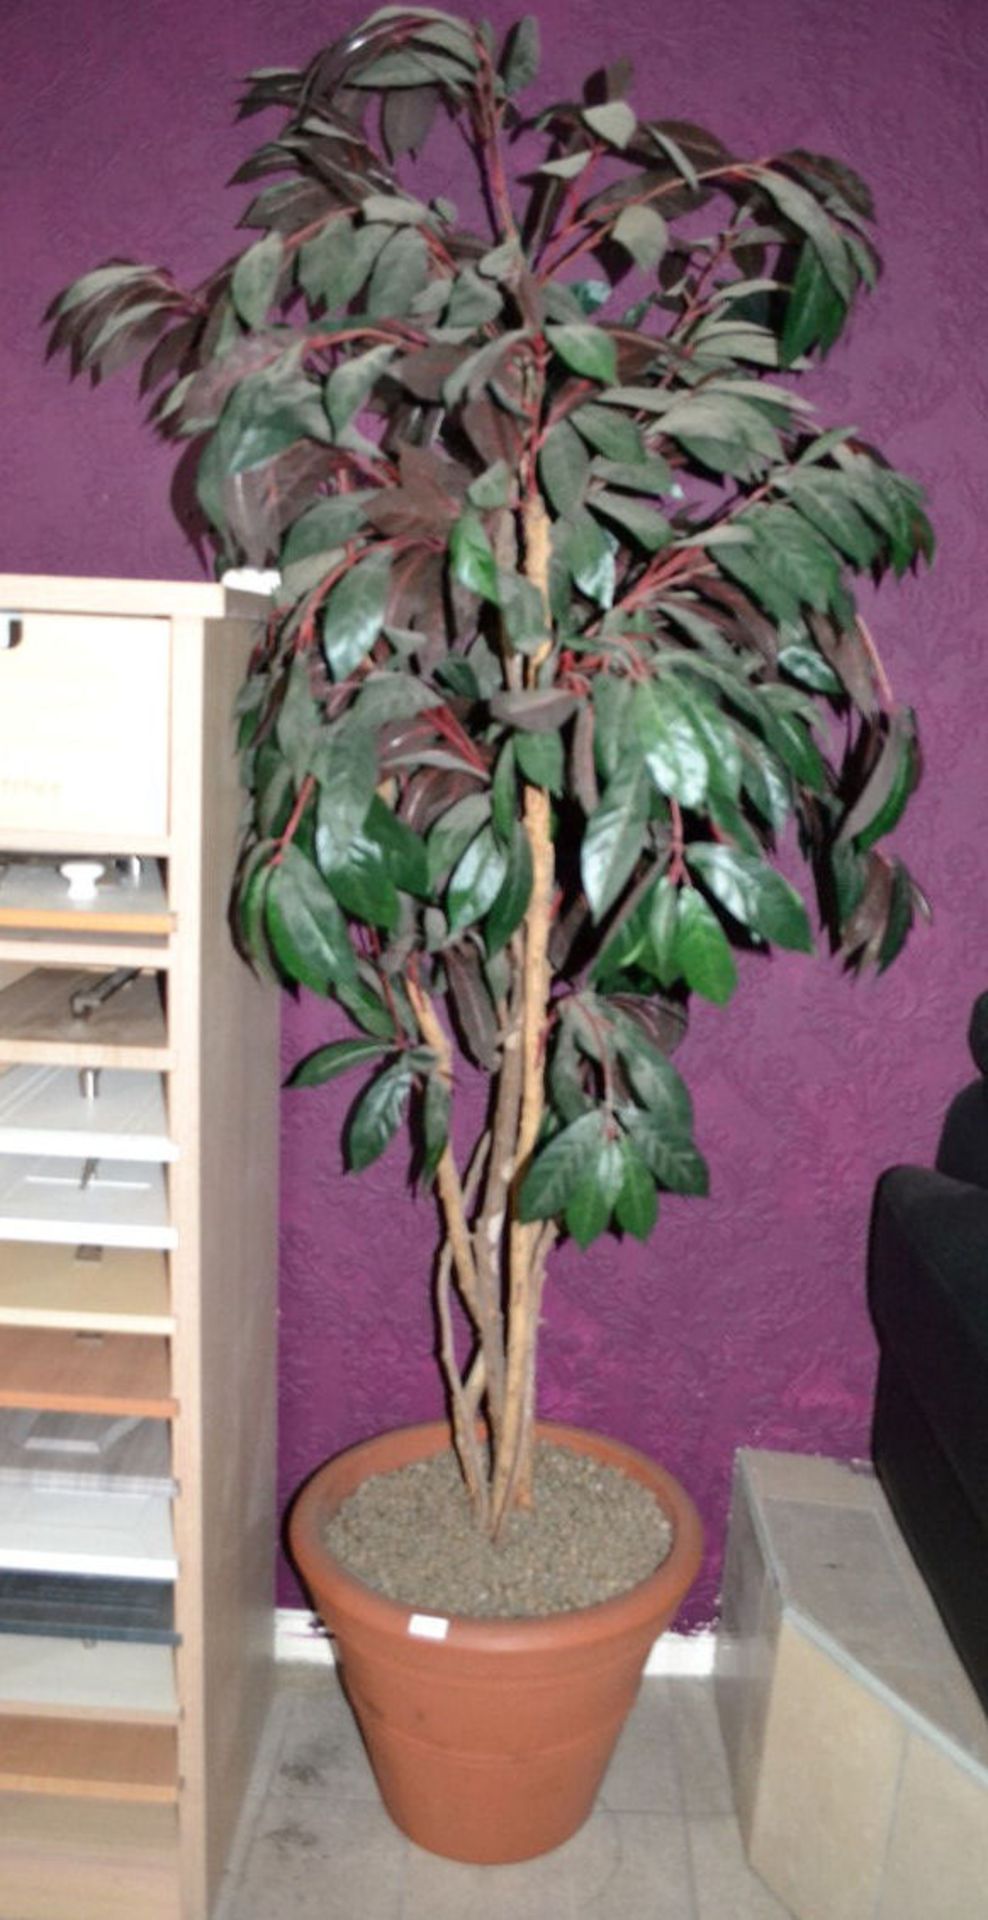 1 x Large Fake Potted Plant. Tub Is Plastic. Tub Is 36.5cm Tall And 47cm Wide. Total Height 195cm.